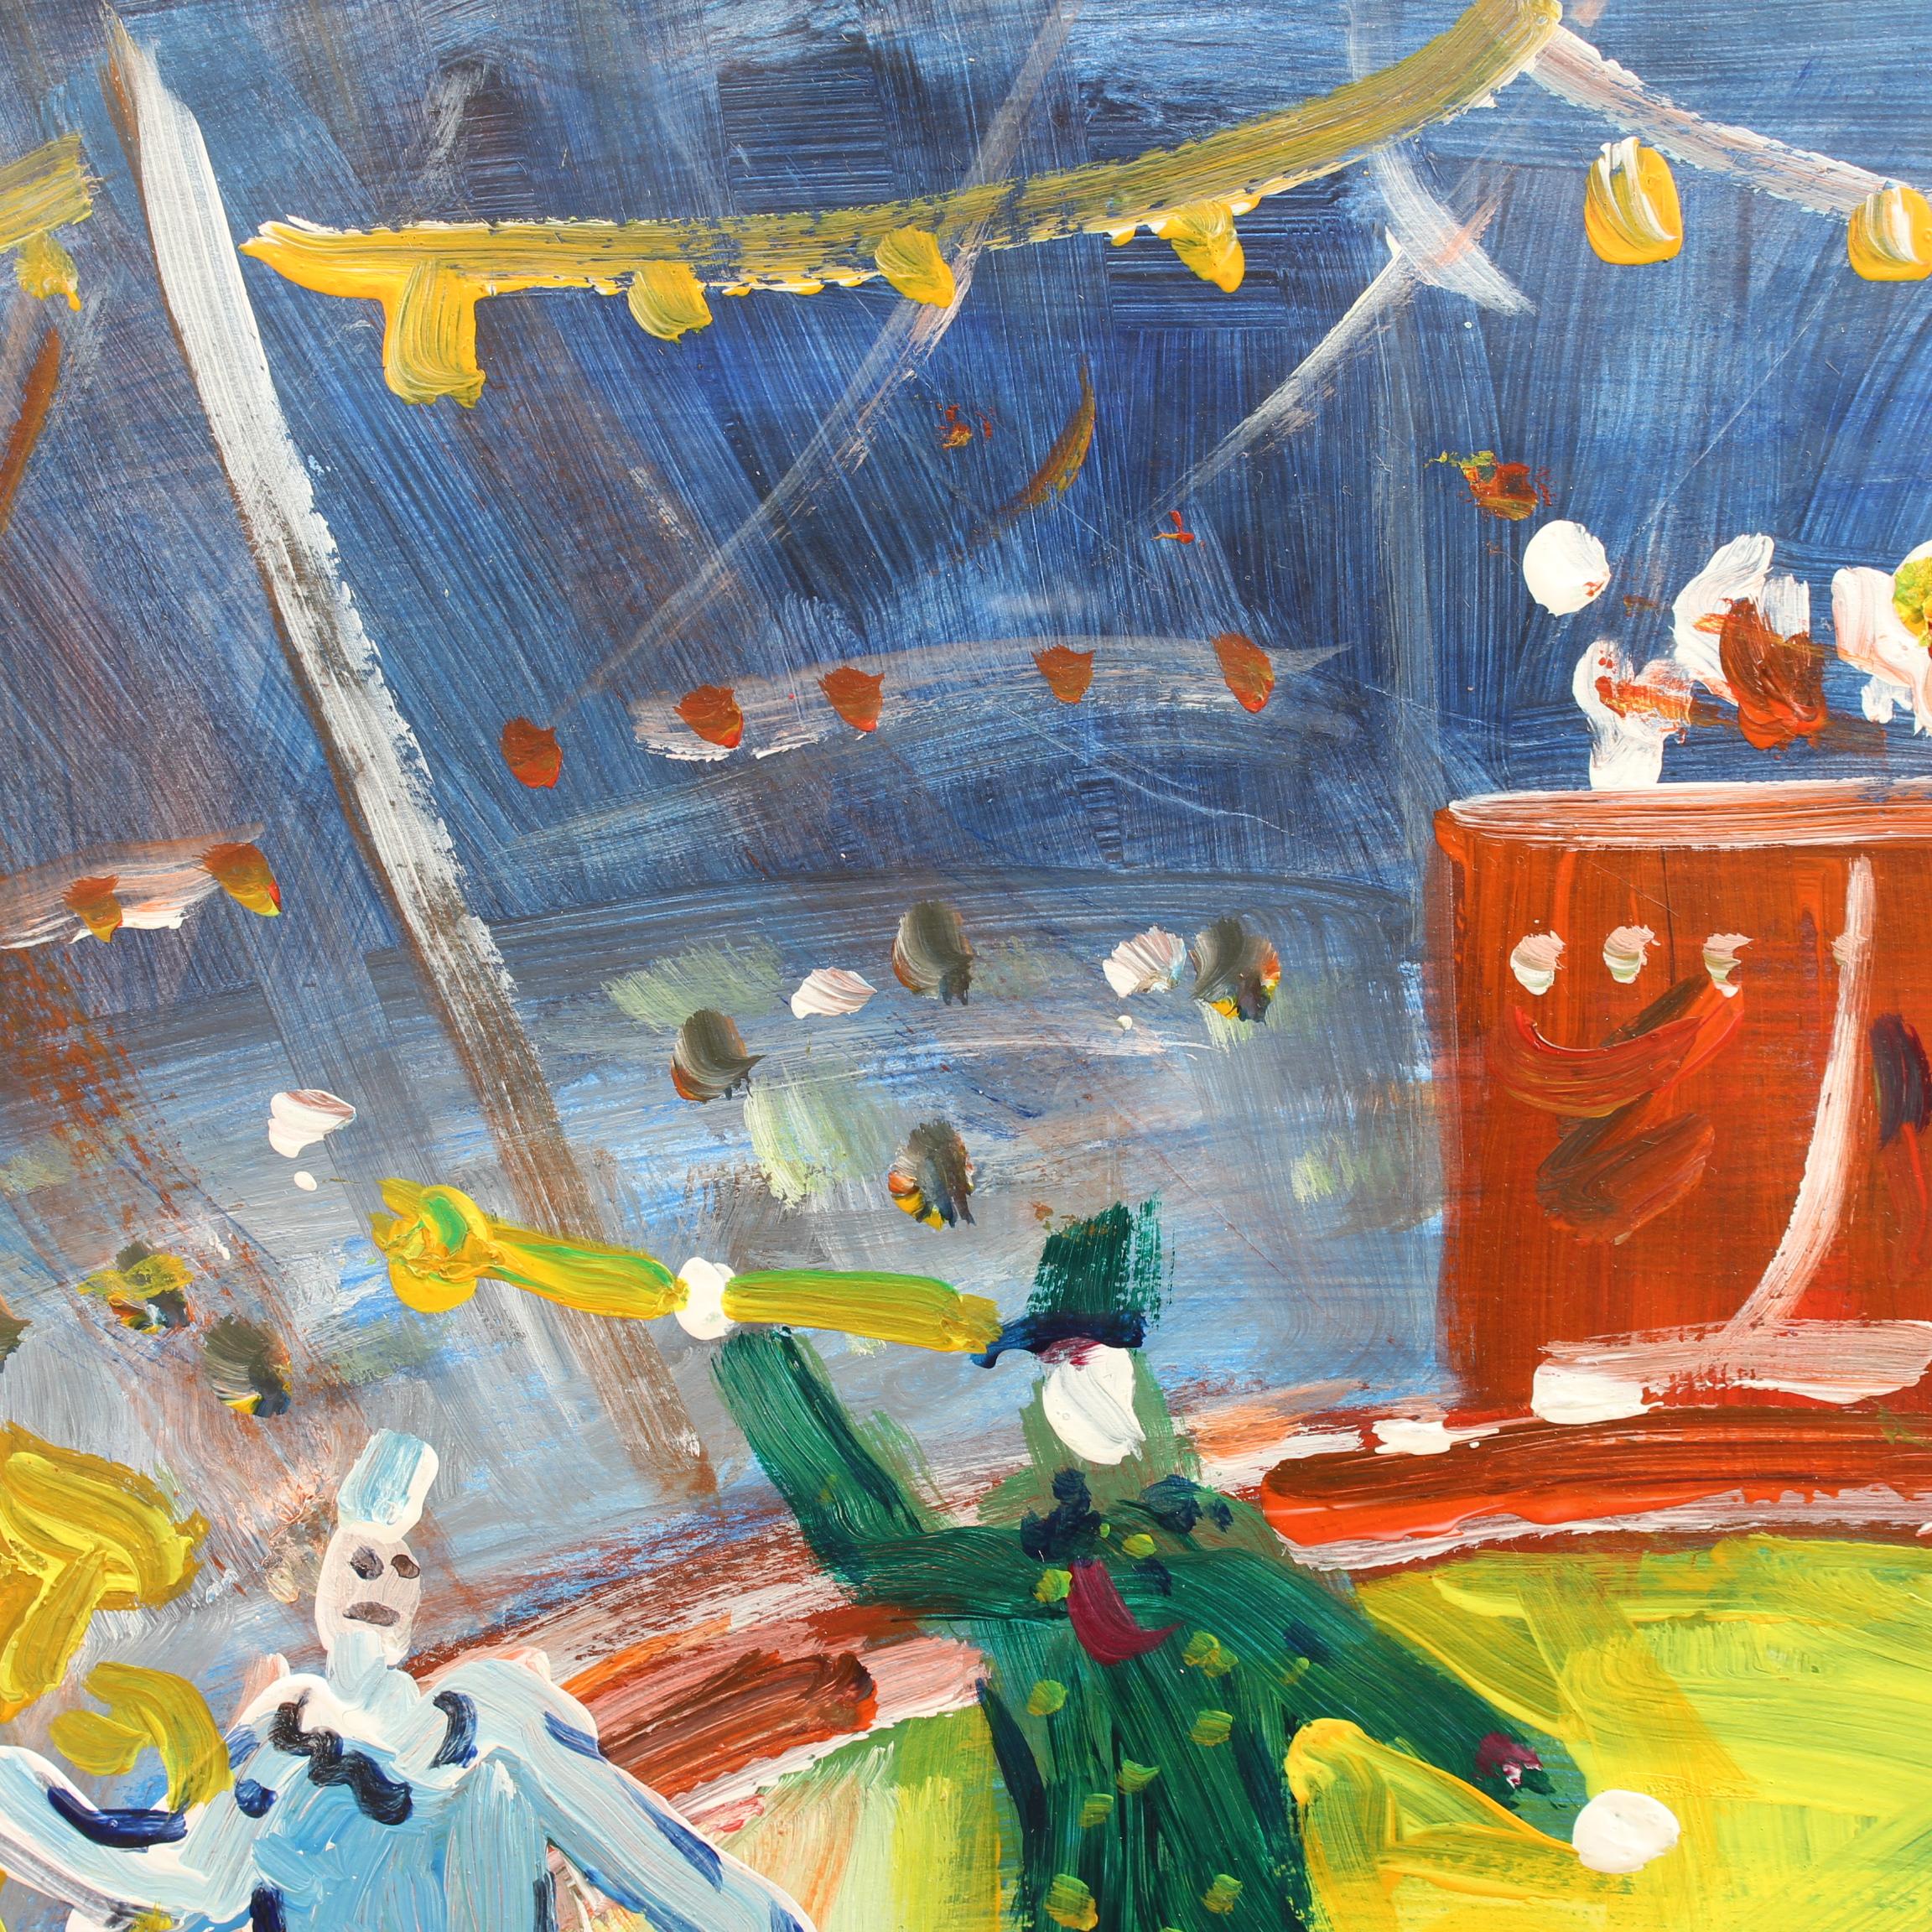 'The Circus', gouache on art paper, by Roland Dubuc (circa 1970s). Exploding in colour, this artwork presents a whimsical scene of one of the well known Parisian circuses. France has a long history of adoring and supporting circus troupes. Unknown